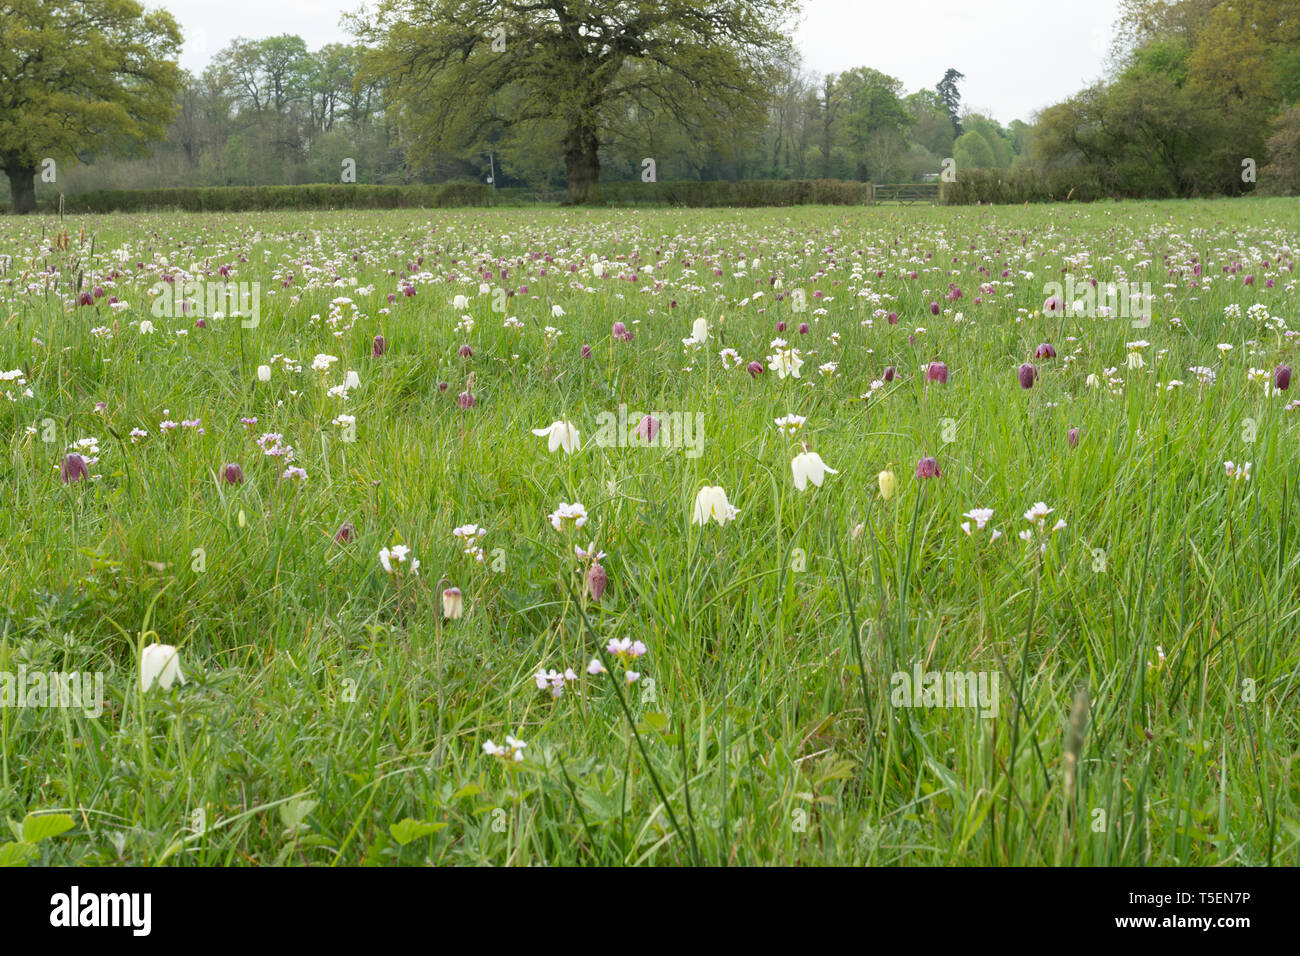 Snake's head fritillaries (snake's head fritillary - Fritillaria meleagris) flowering in a wildflower meadow during April, UK Stock Photo